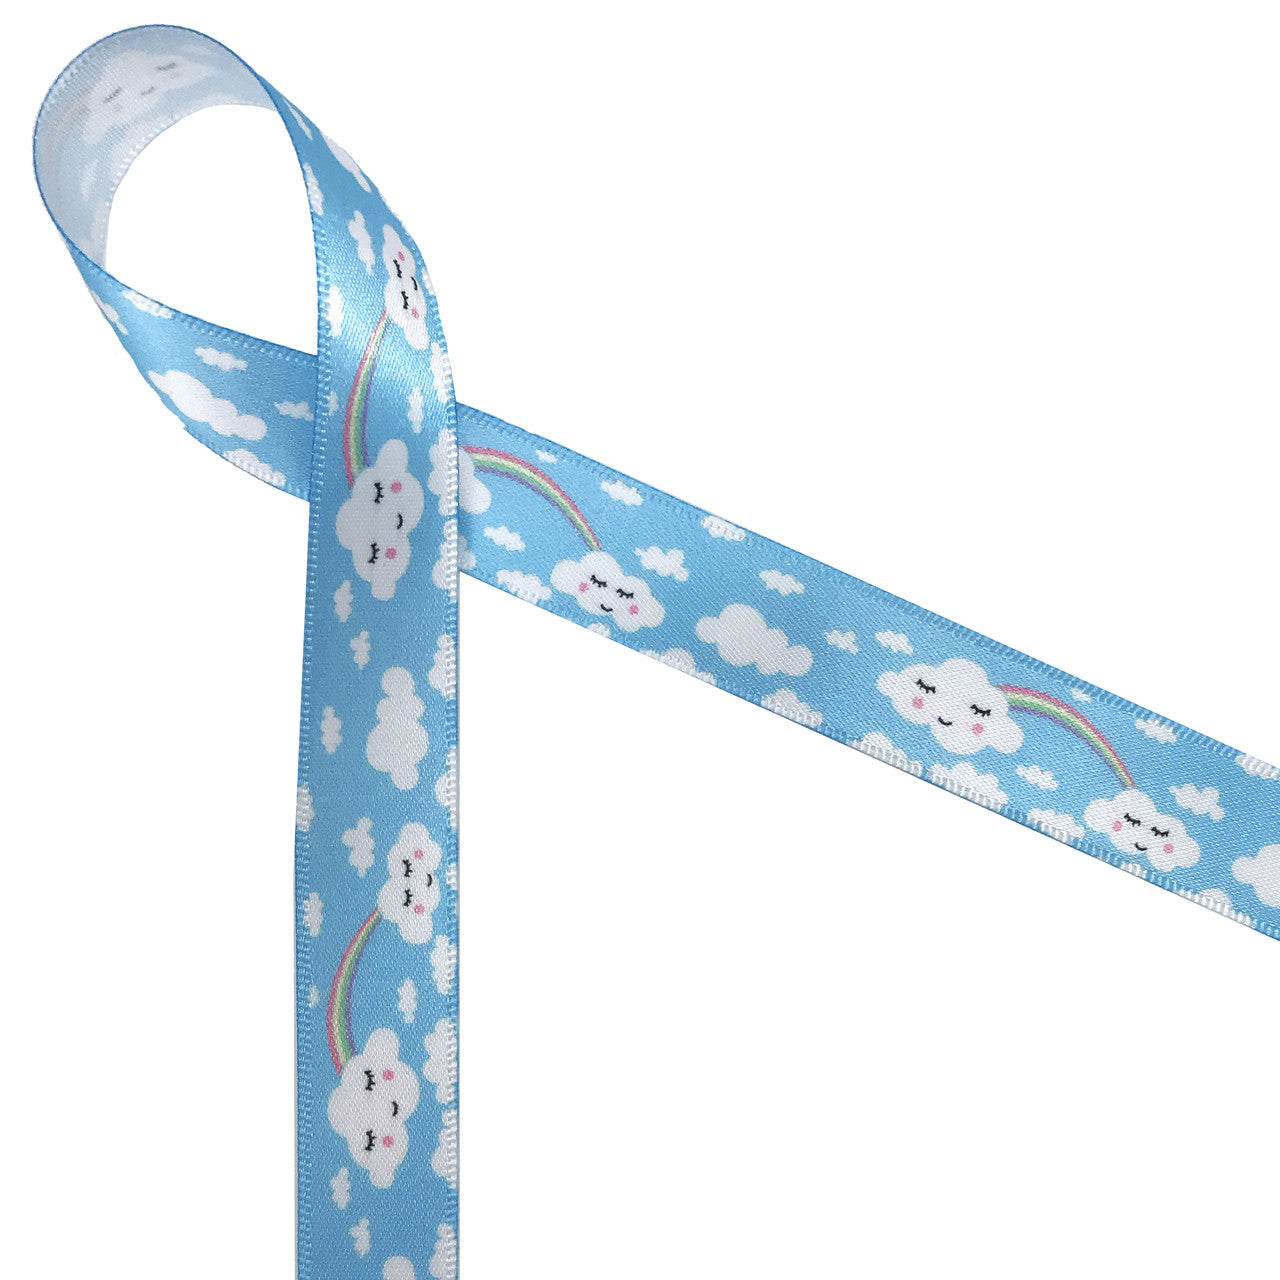 Clouds and rainbows ribbon with a blue background printed on 5/8" white single face satin